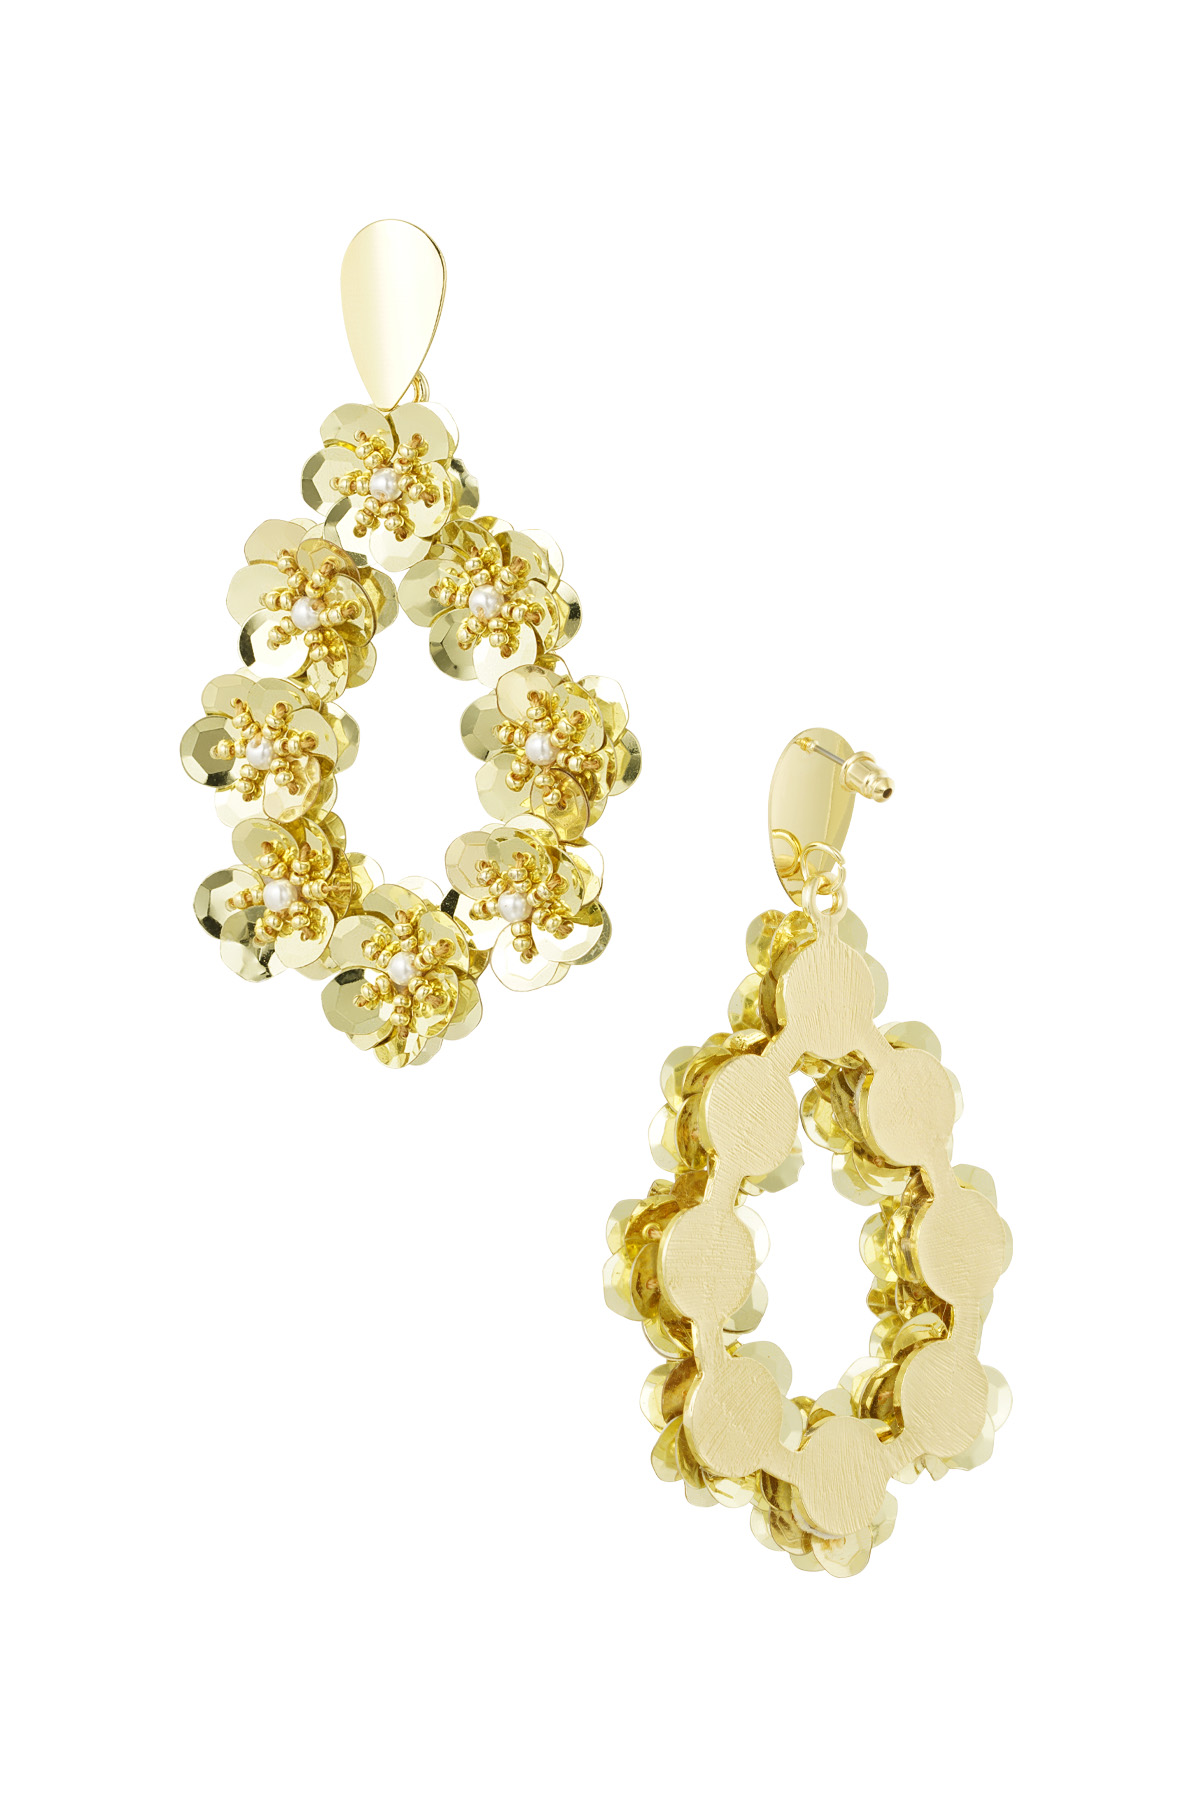 Hanging earrings with flowers - gold  h5 